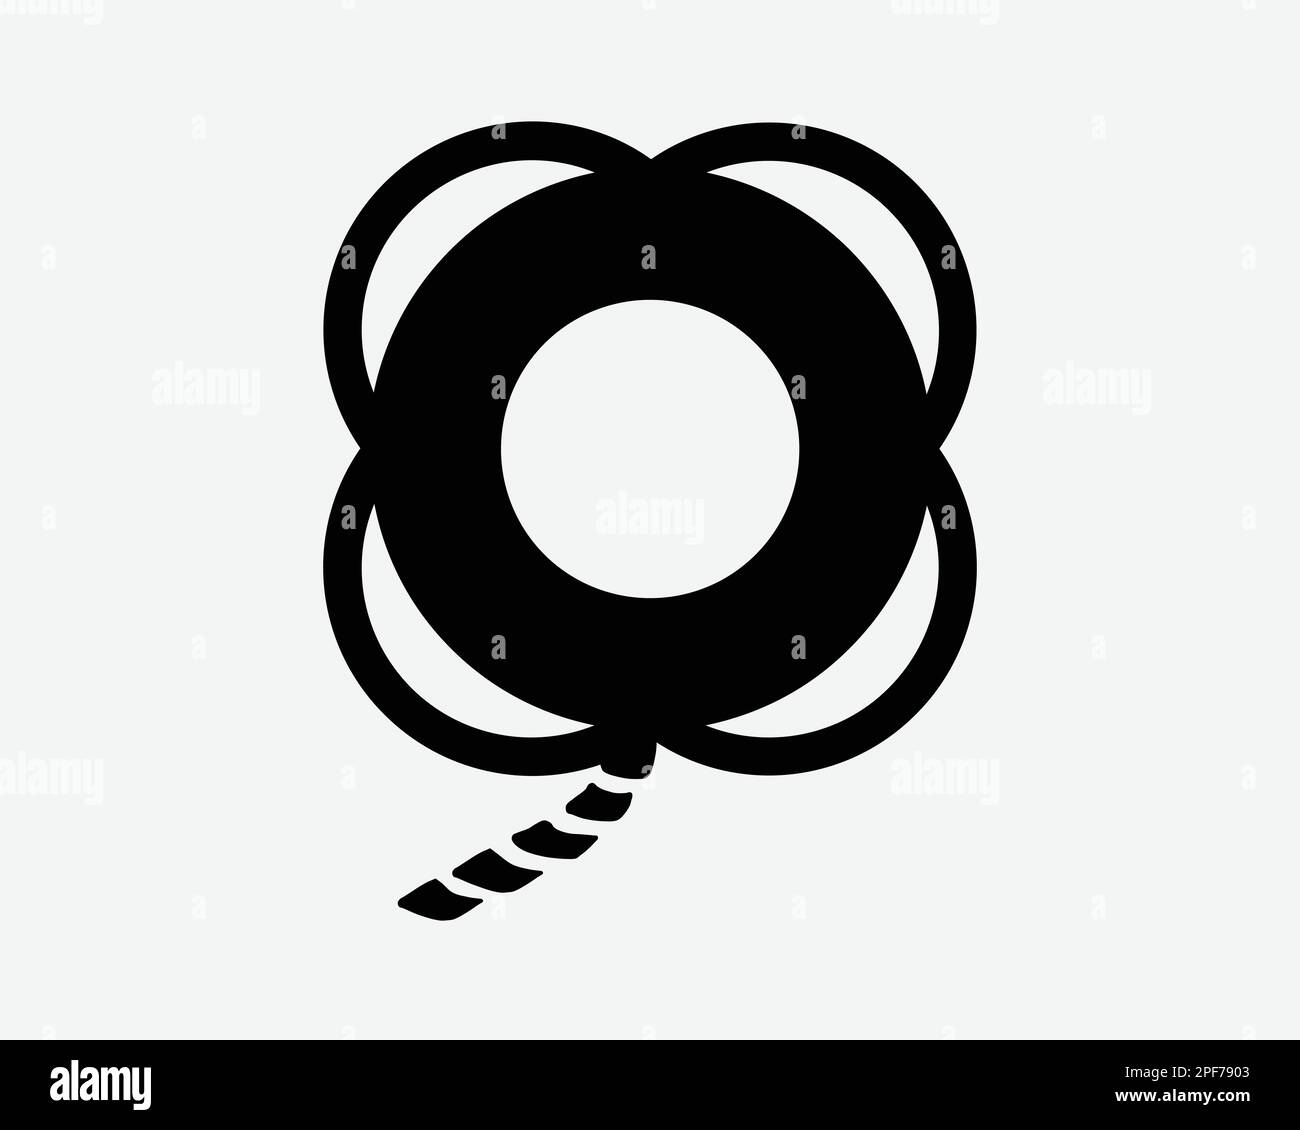 Lifebuoy Ring Life Buoy Lifesaver with Line Rope String Black White Silhouette Sign Symbol Icon Graphic Clipart Artwork Illustration Pictogram Vector Stock Vector